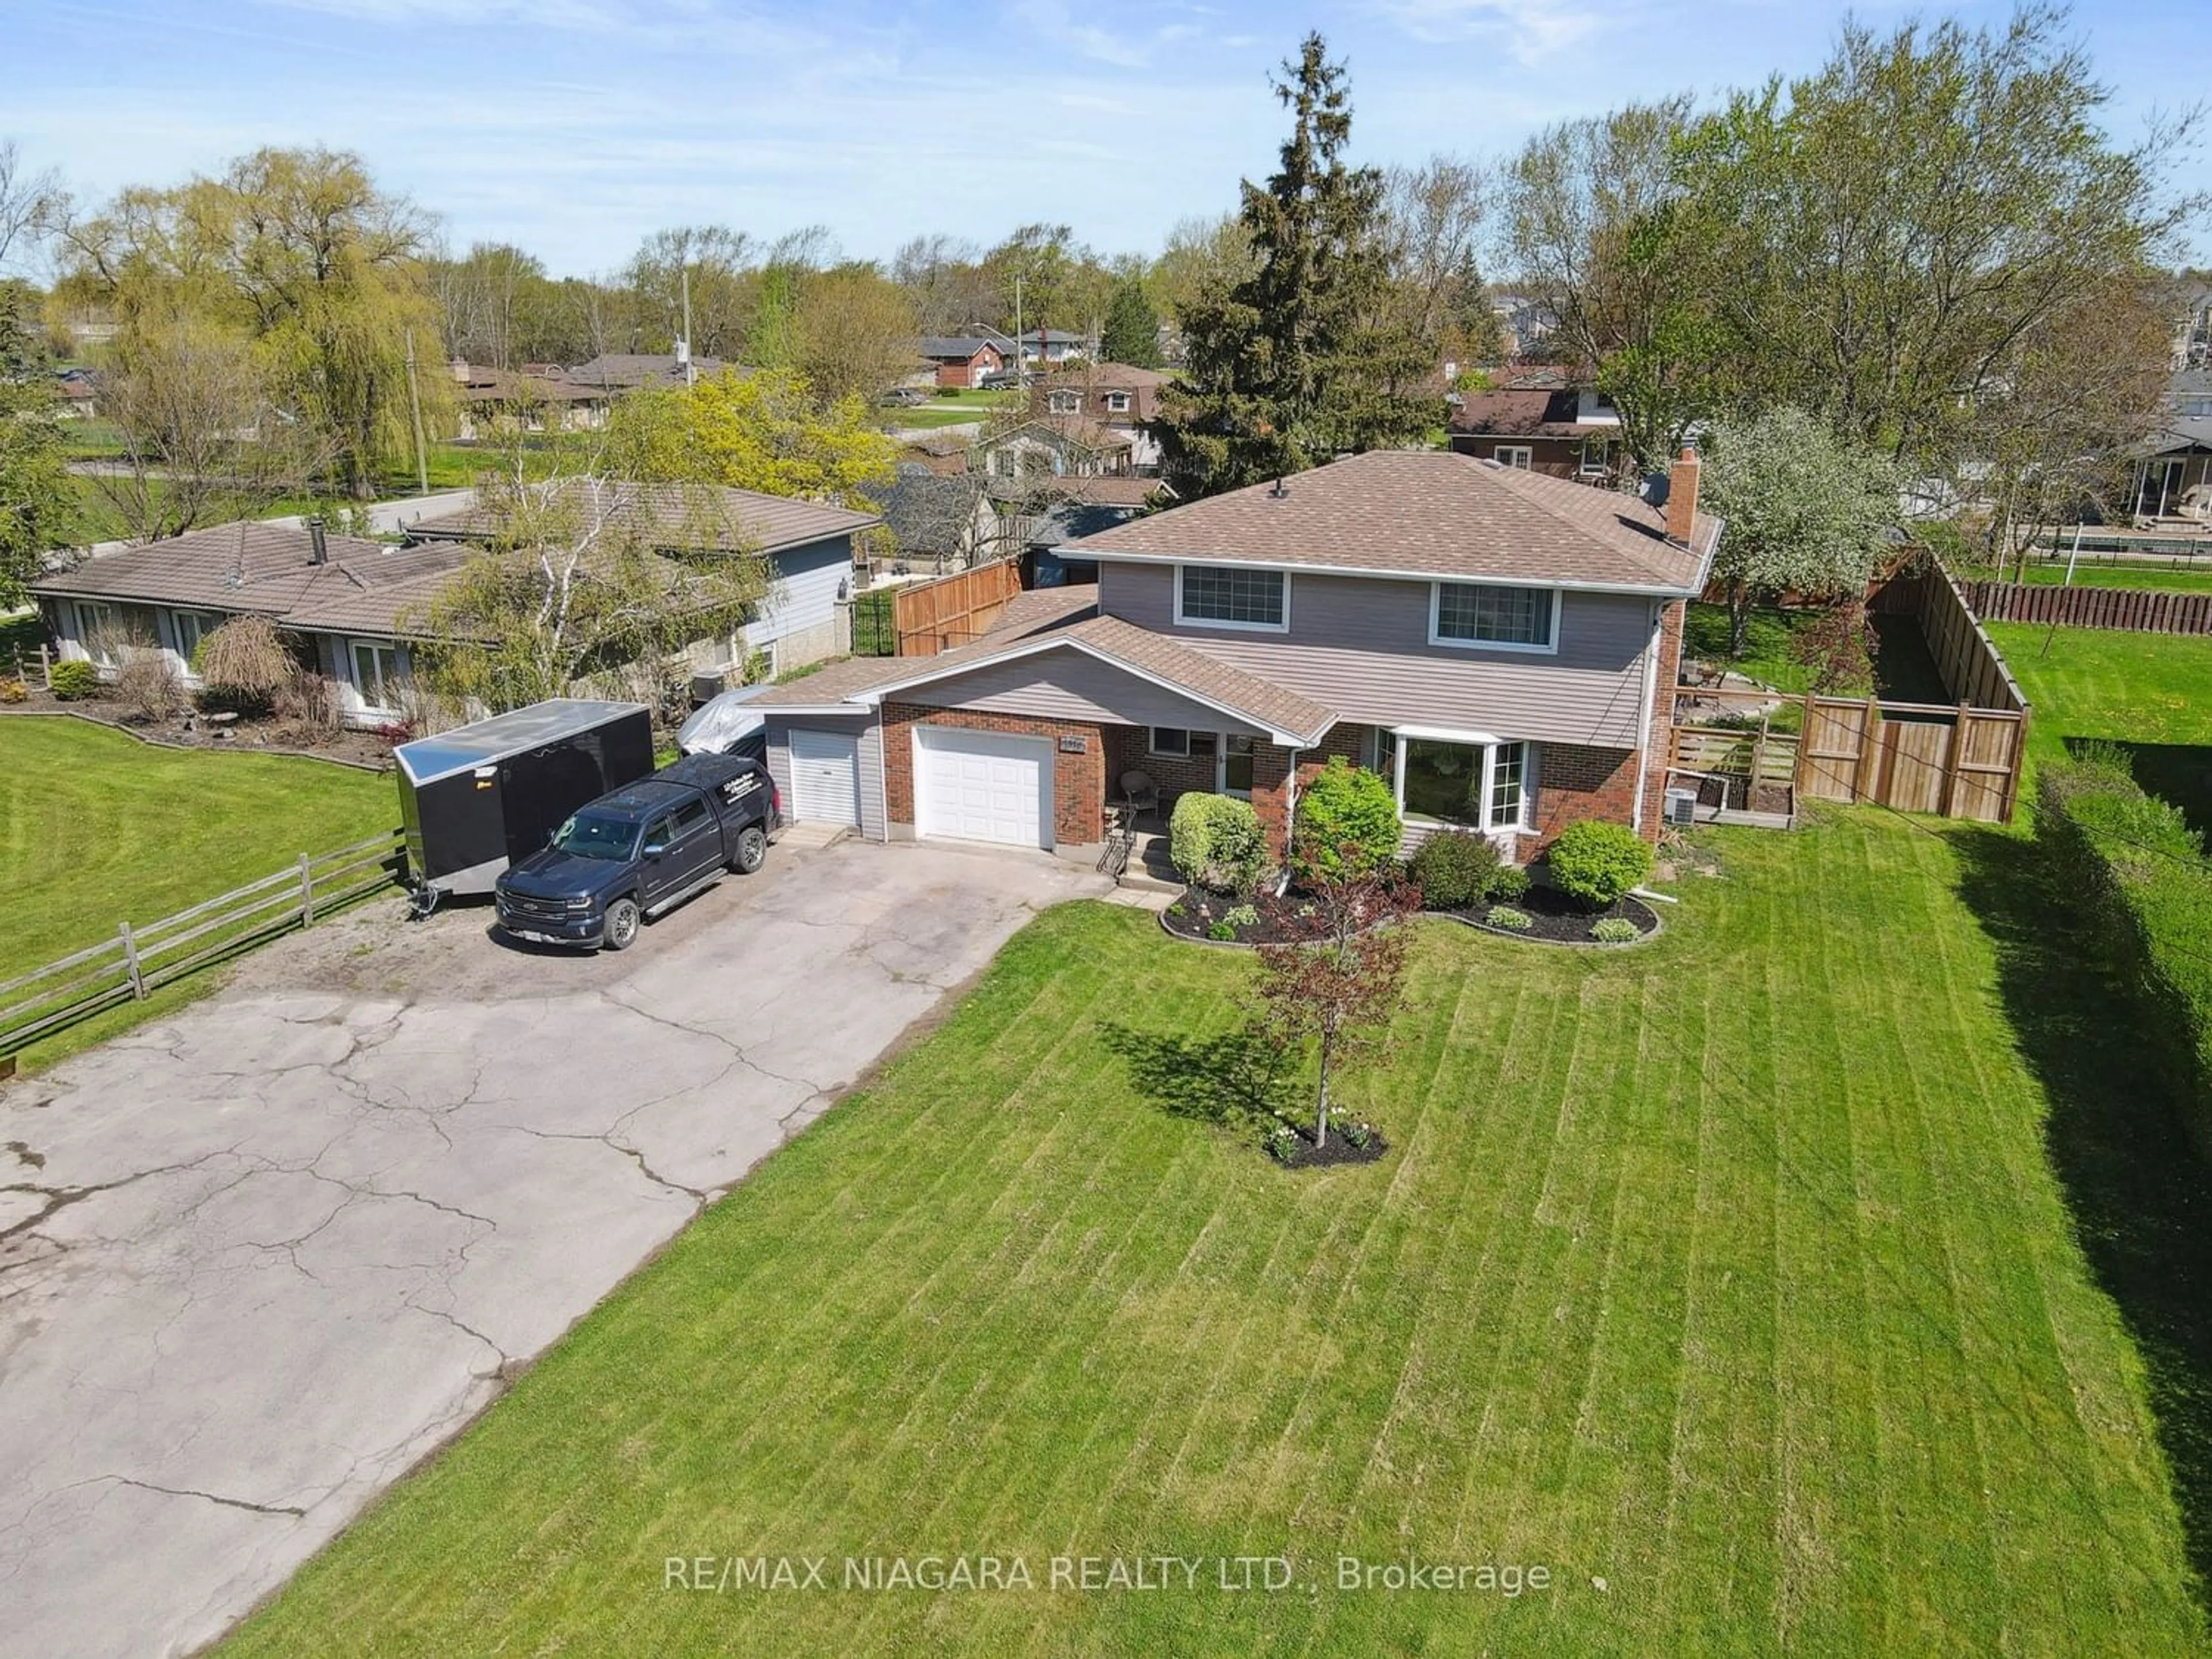 Frontside or backside of a home for 1516 Garrison Rd, Fort Erie Ontario L2A 1P6